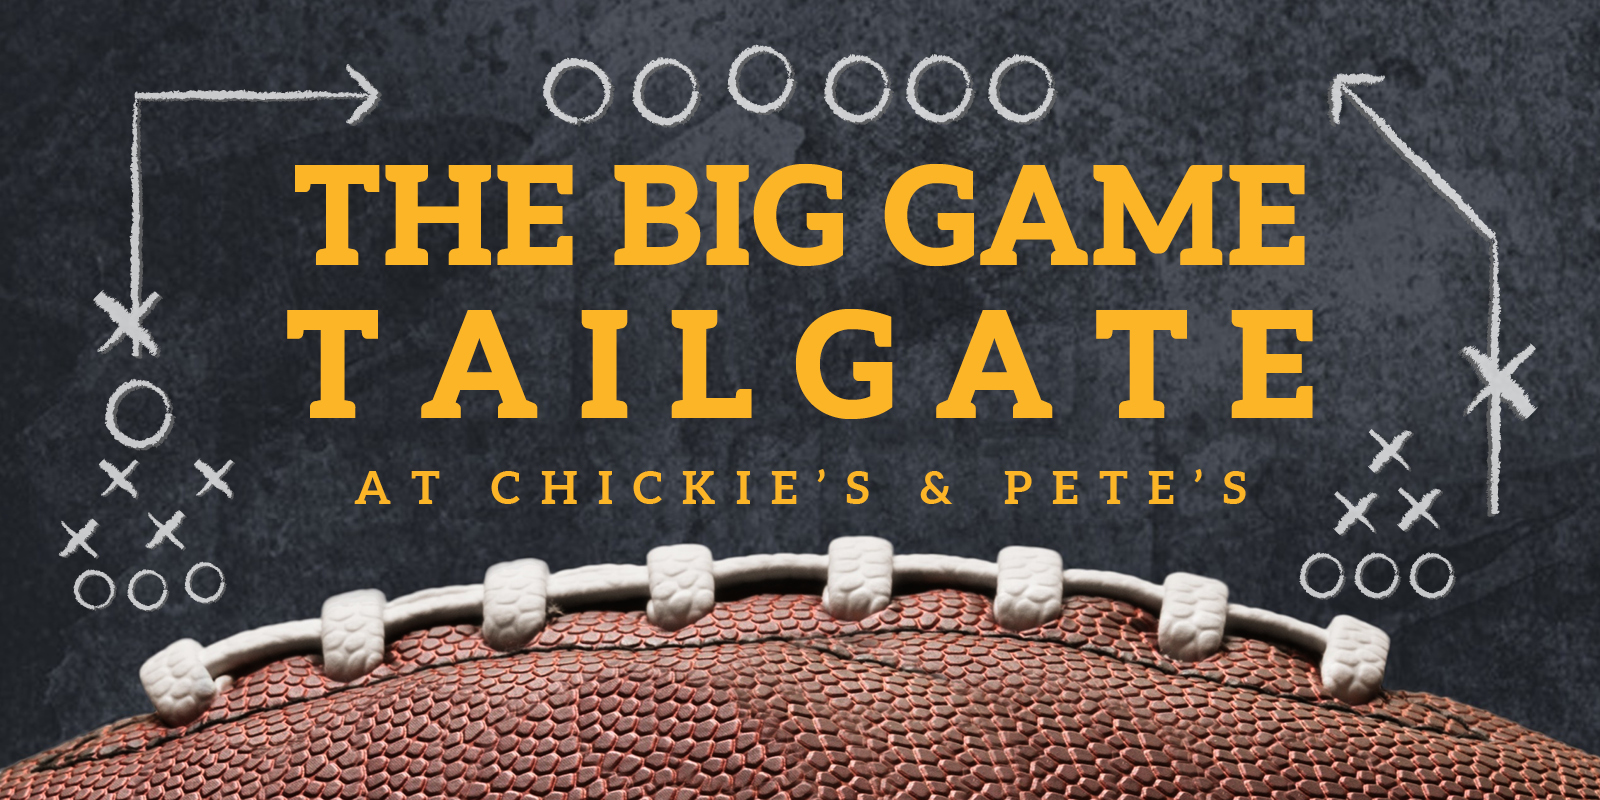 The Big Game Tailgate at Chickie's & Pete's copy on top of a football image